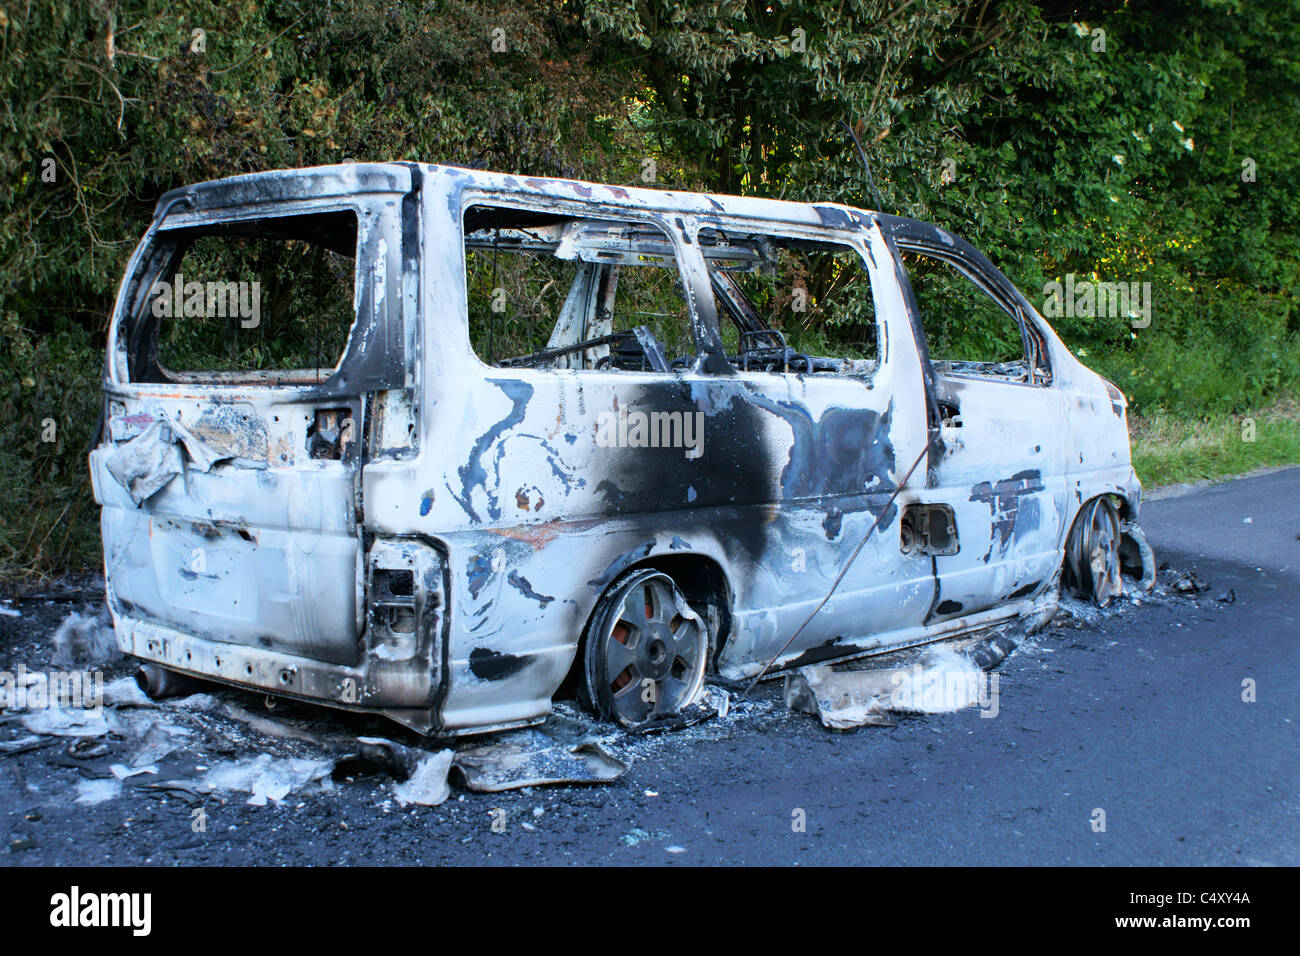 Vandalised burnt out van abandoned on the road. Stock Photo